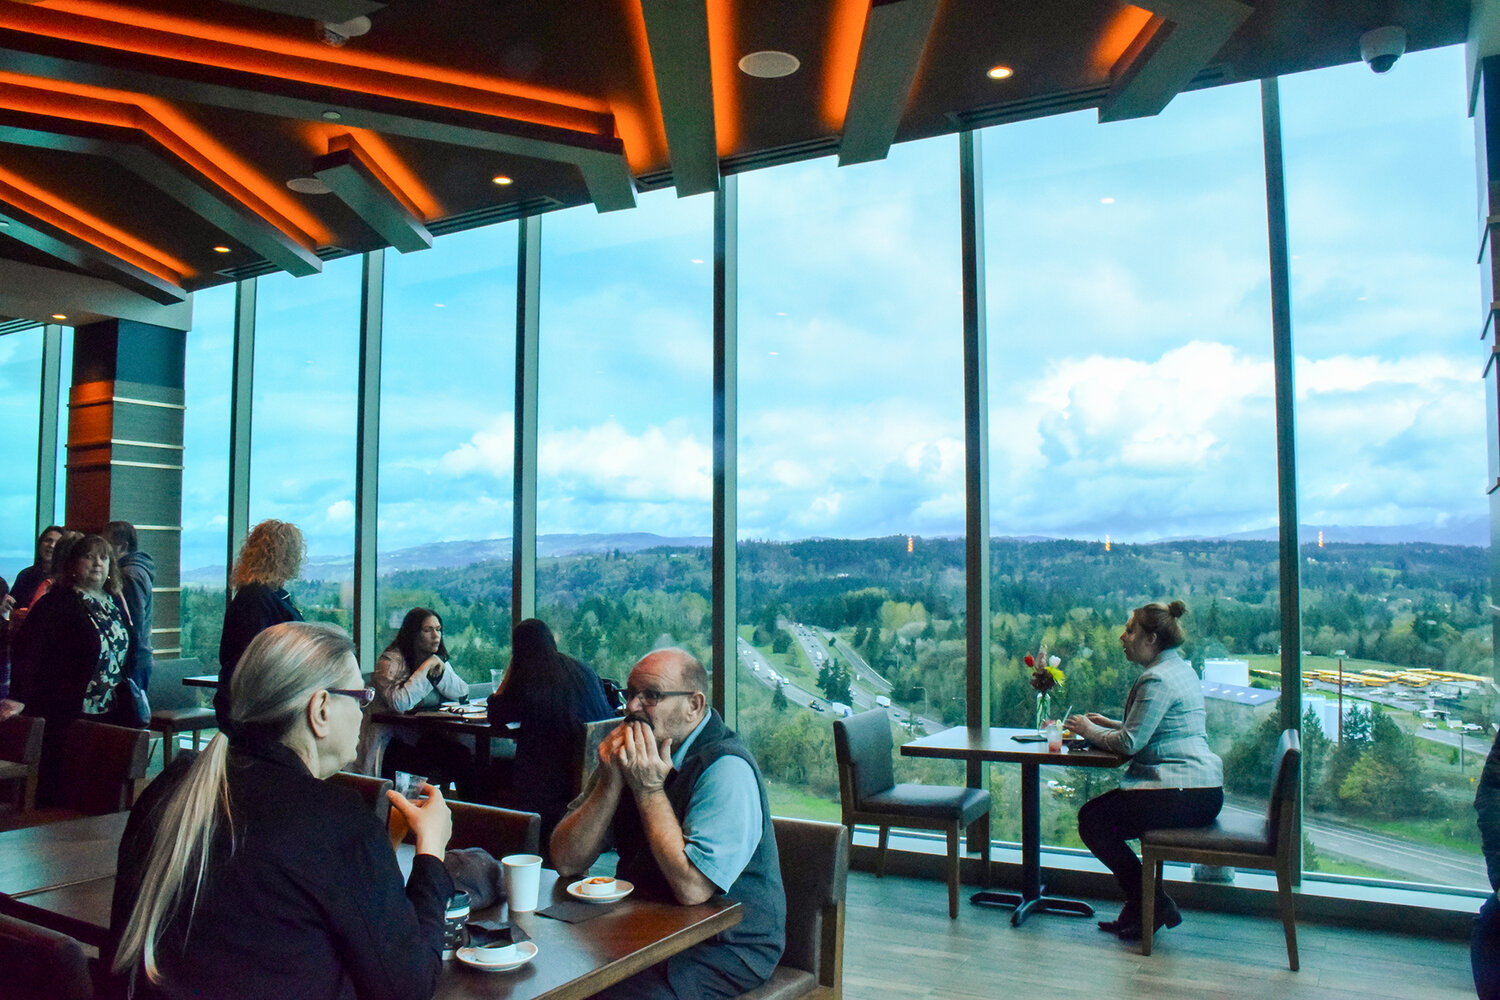 The first patrons of the top-floor restaurant at ilani’s new hotel sit with a scenic view of Clark County following the grand opening of the building on April 24.